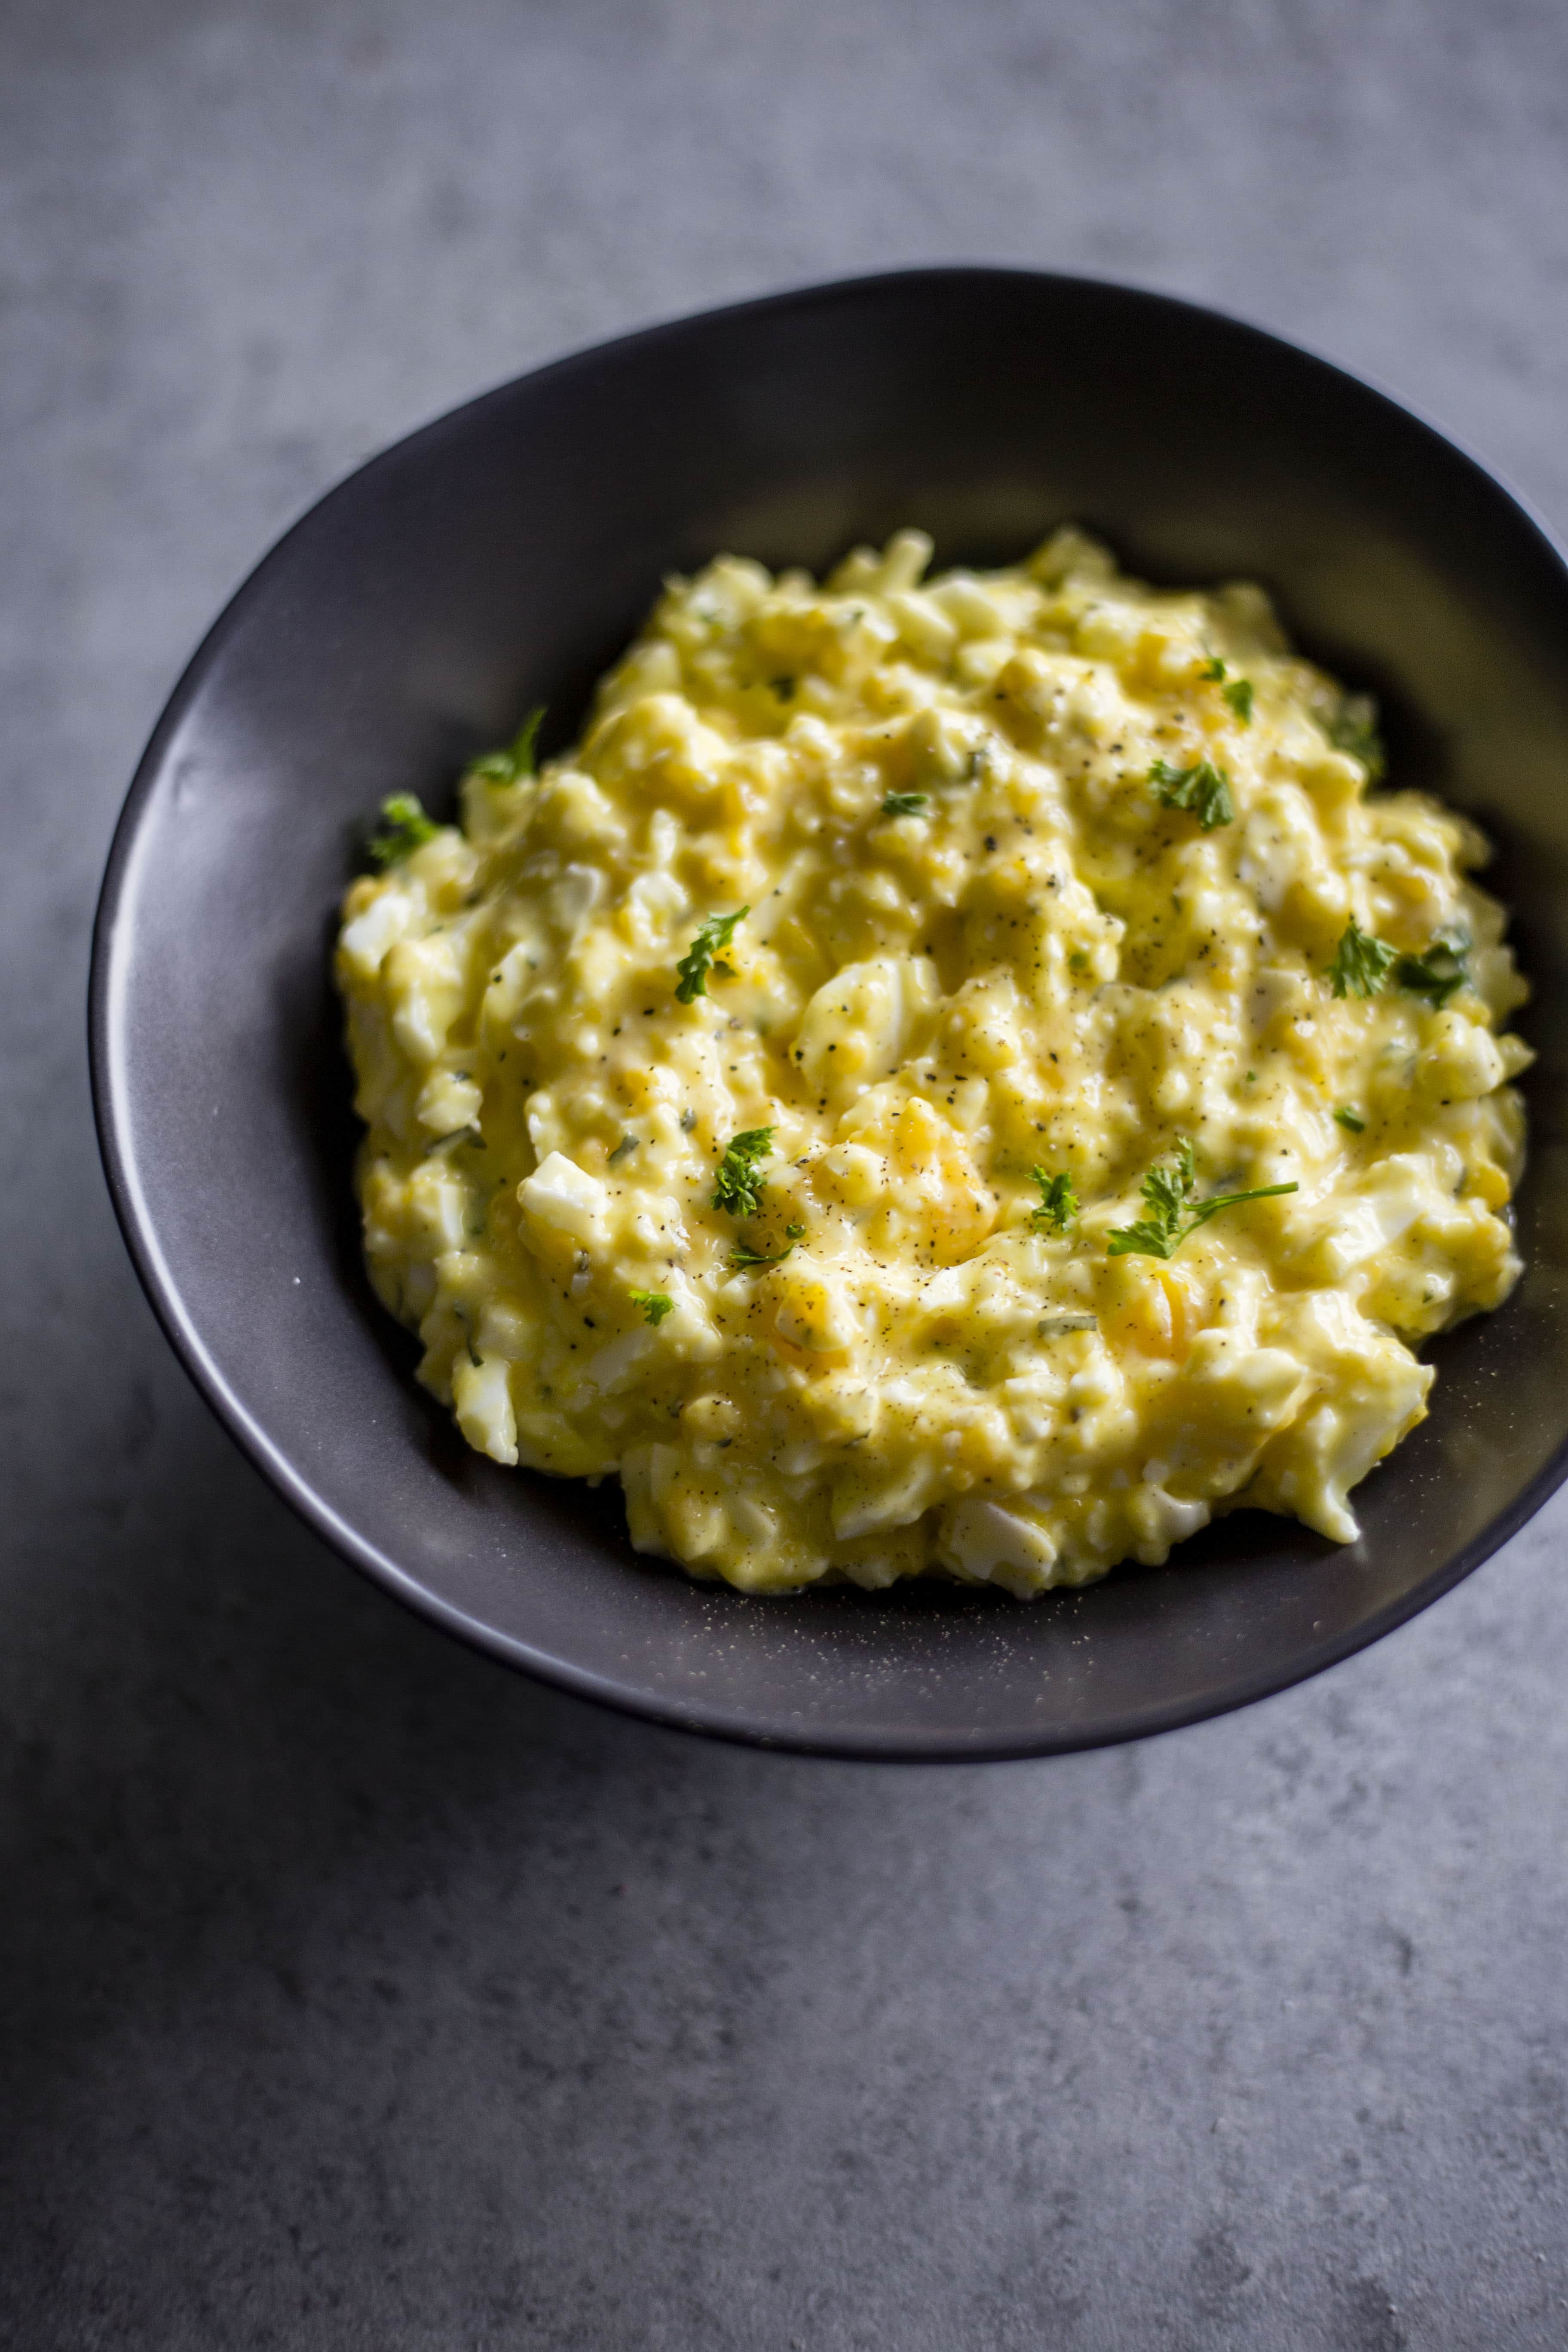 Soft Boiled Egg Salad | Enjoy your soft boiled eggs in egg salad form! Combined with Greek yogurt for a healthier meal option | thealmondeater.com